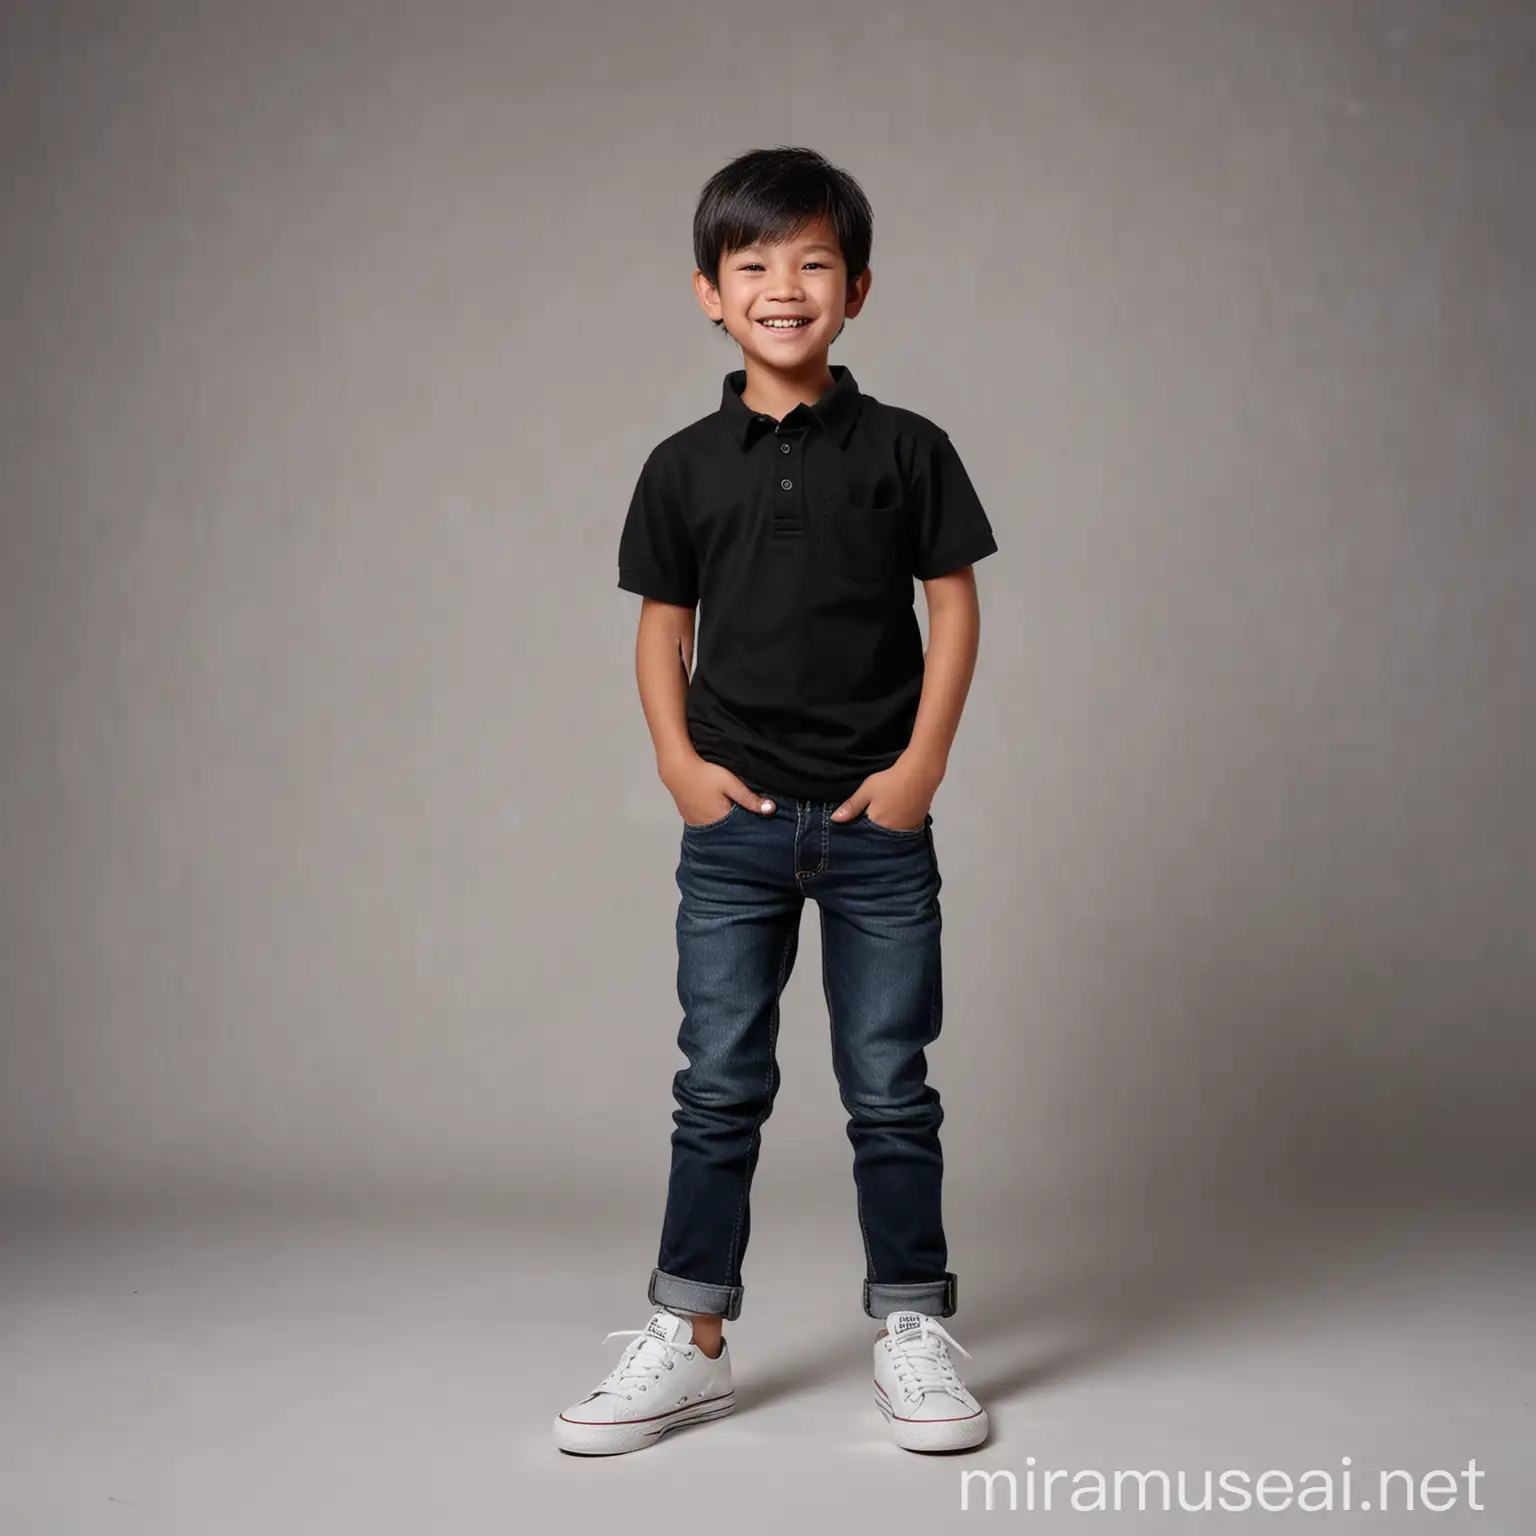 super realistic photo, full body, Indonesian, a boy celebrating his 7th birthday, short hair, smiling, white skin, oval face, wearing a black shirt, jeans, white shoes, place in the studio.